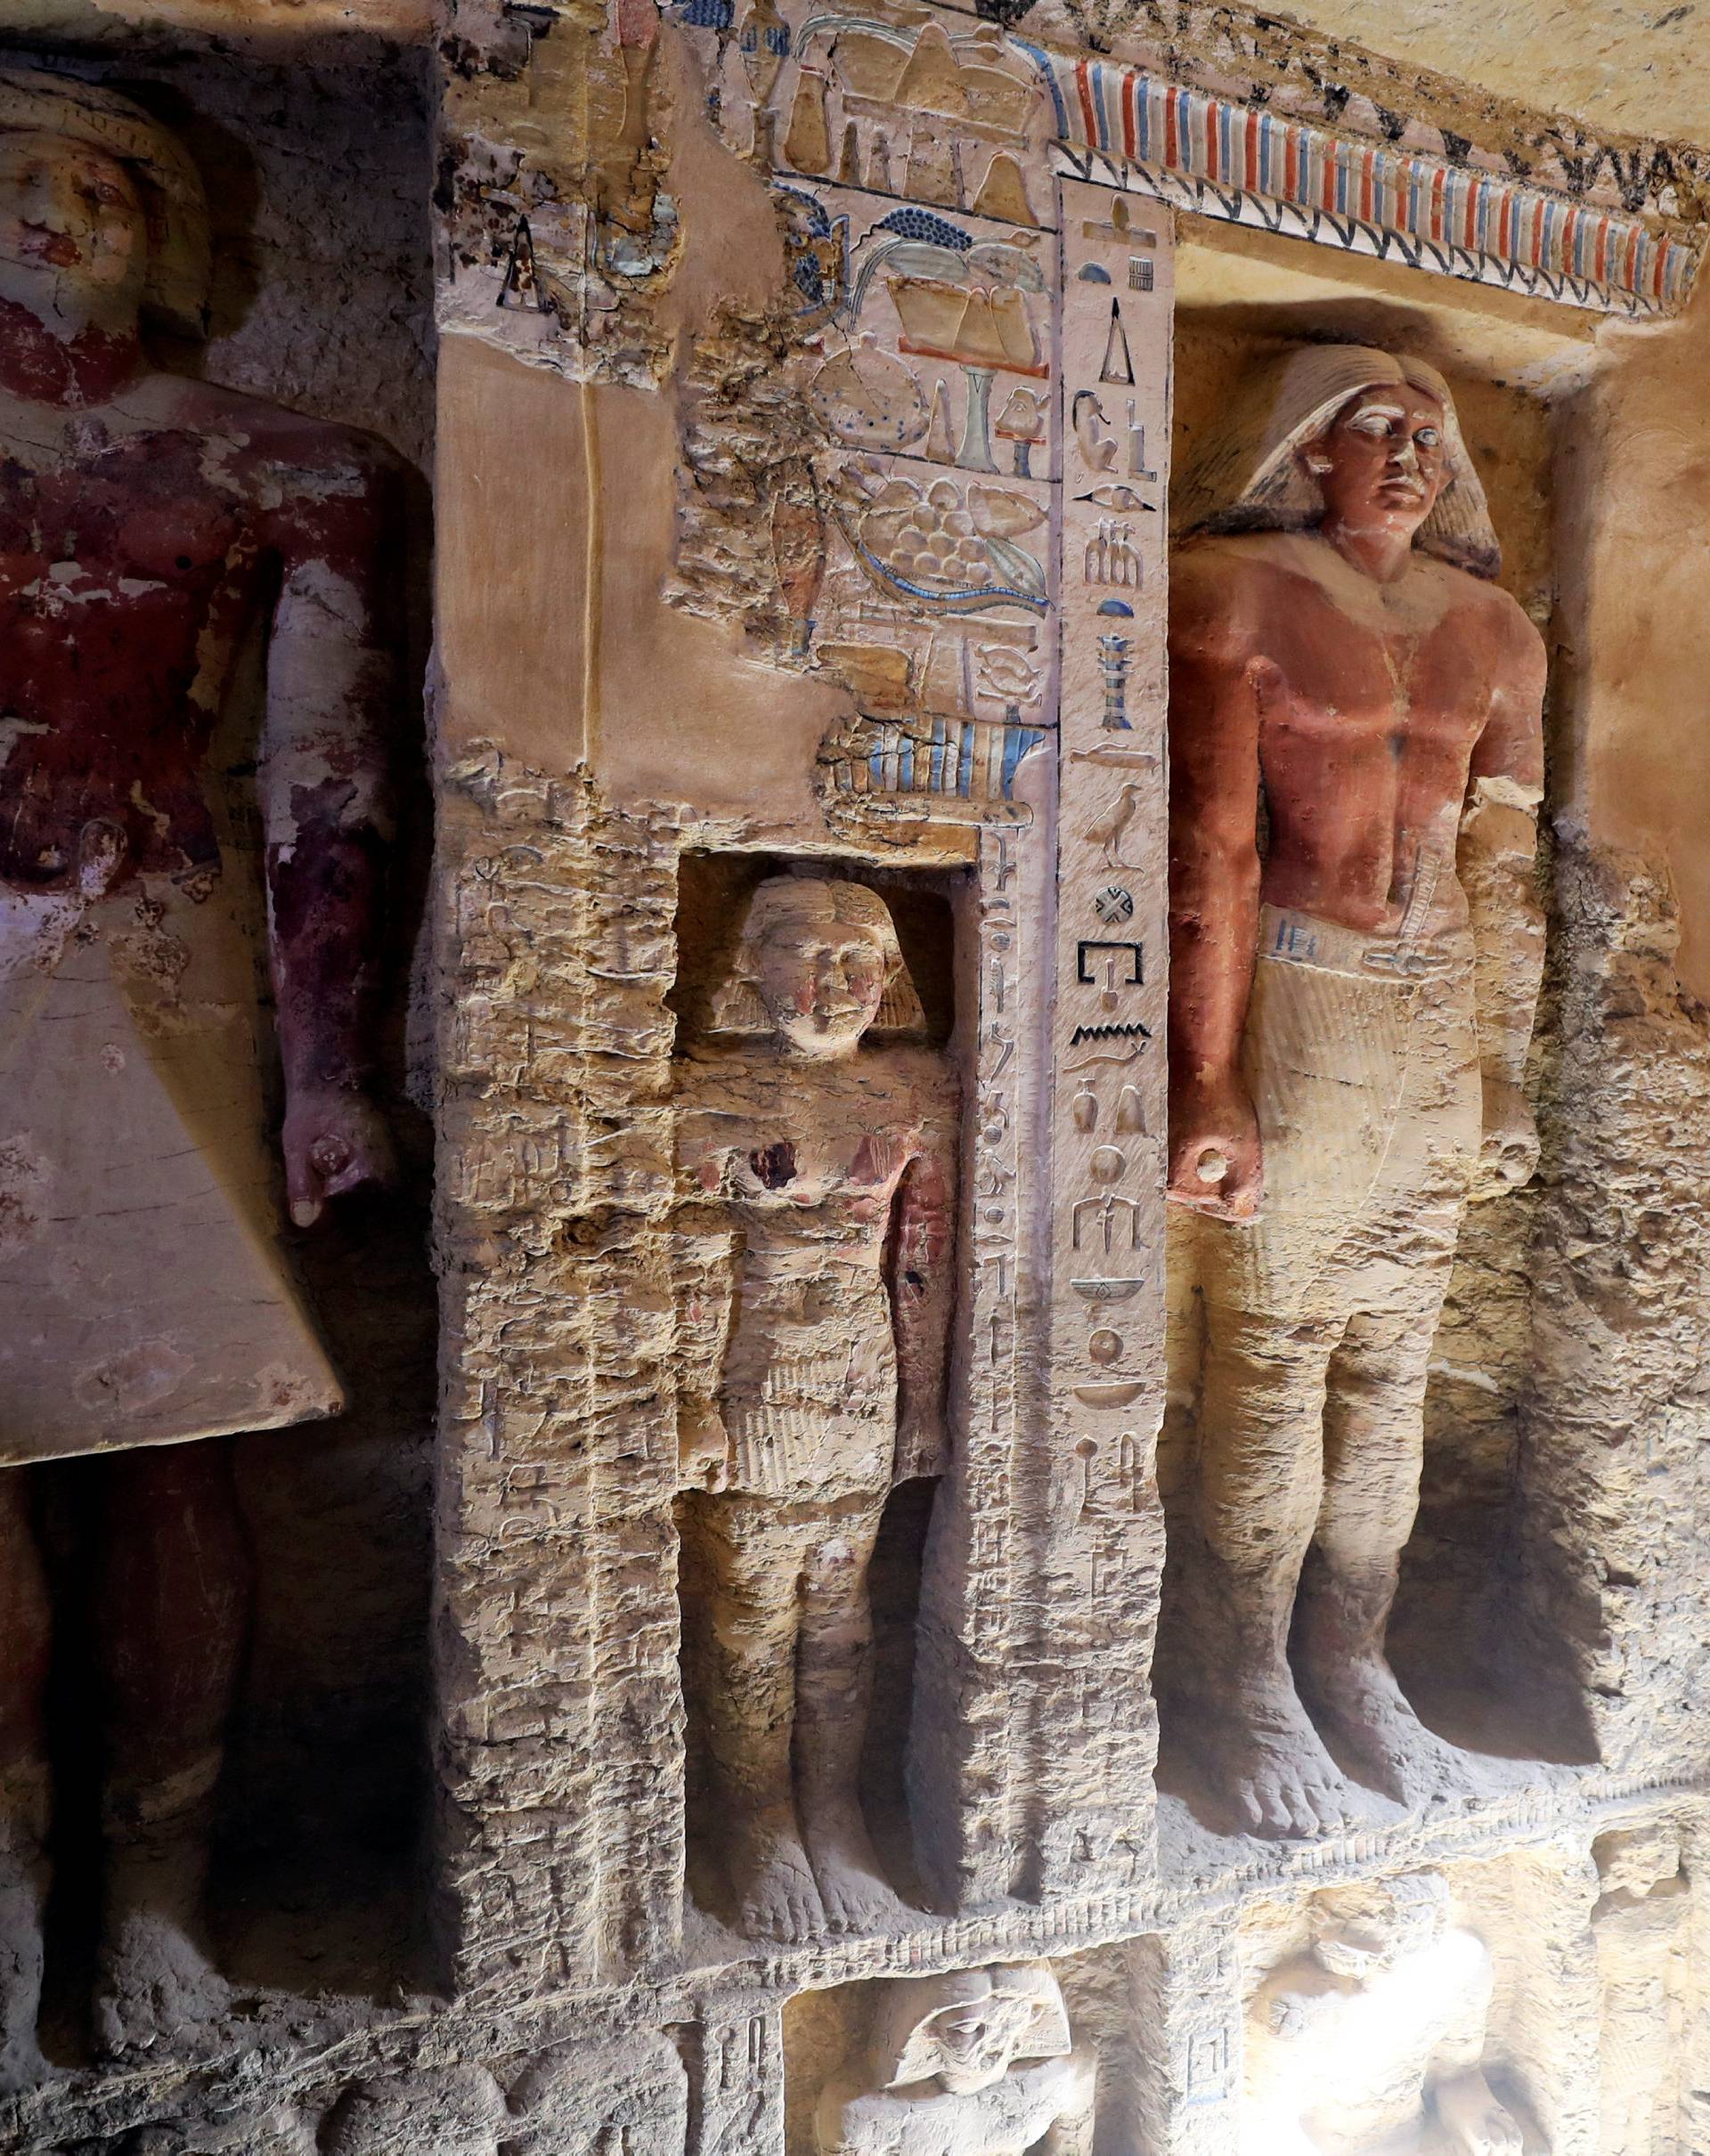 A view of statues inside the newly-discovered tomb of 'Wahtye', which dates from the rule of King Neferirkare Kakai, at the Saqqara area near its necropolis, in Giza